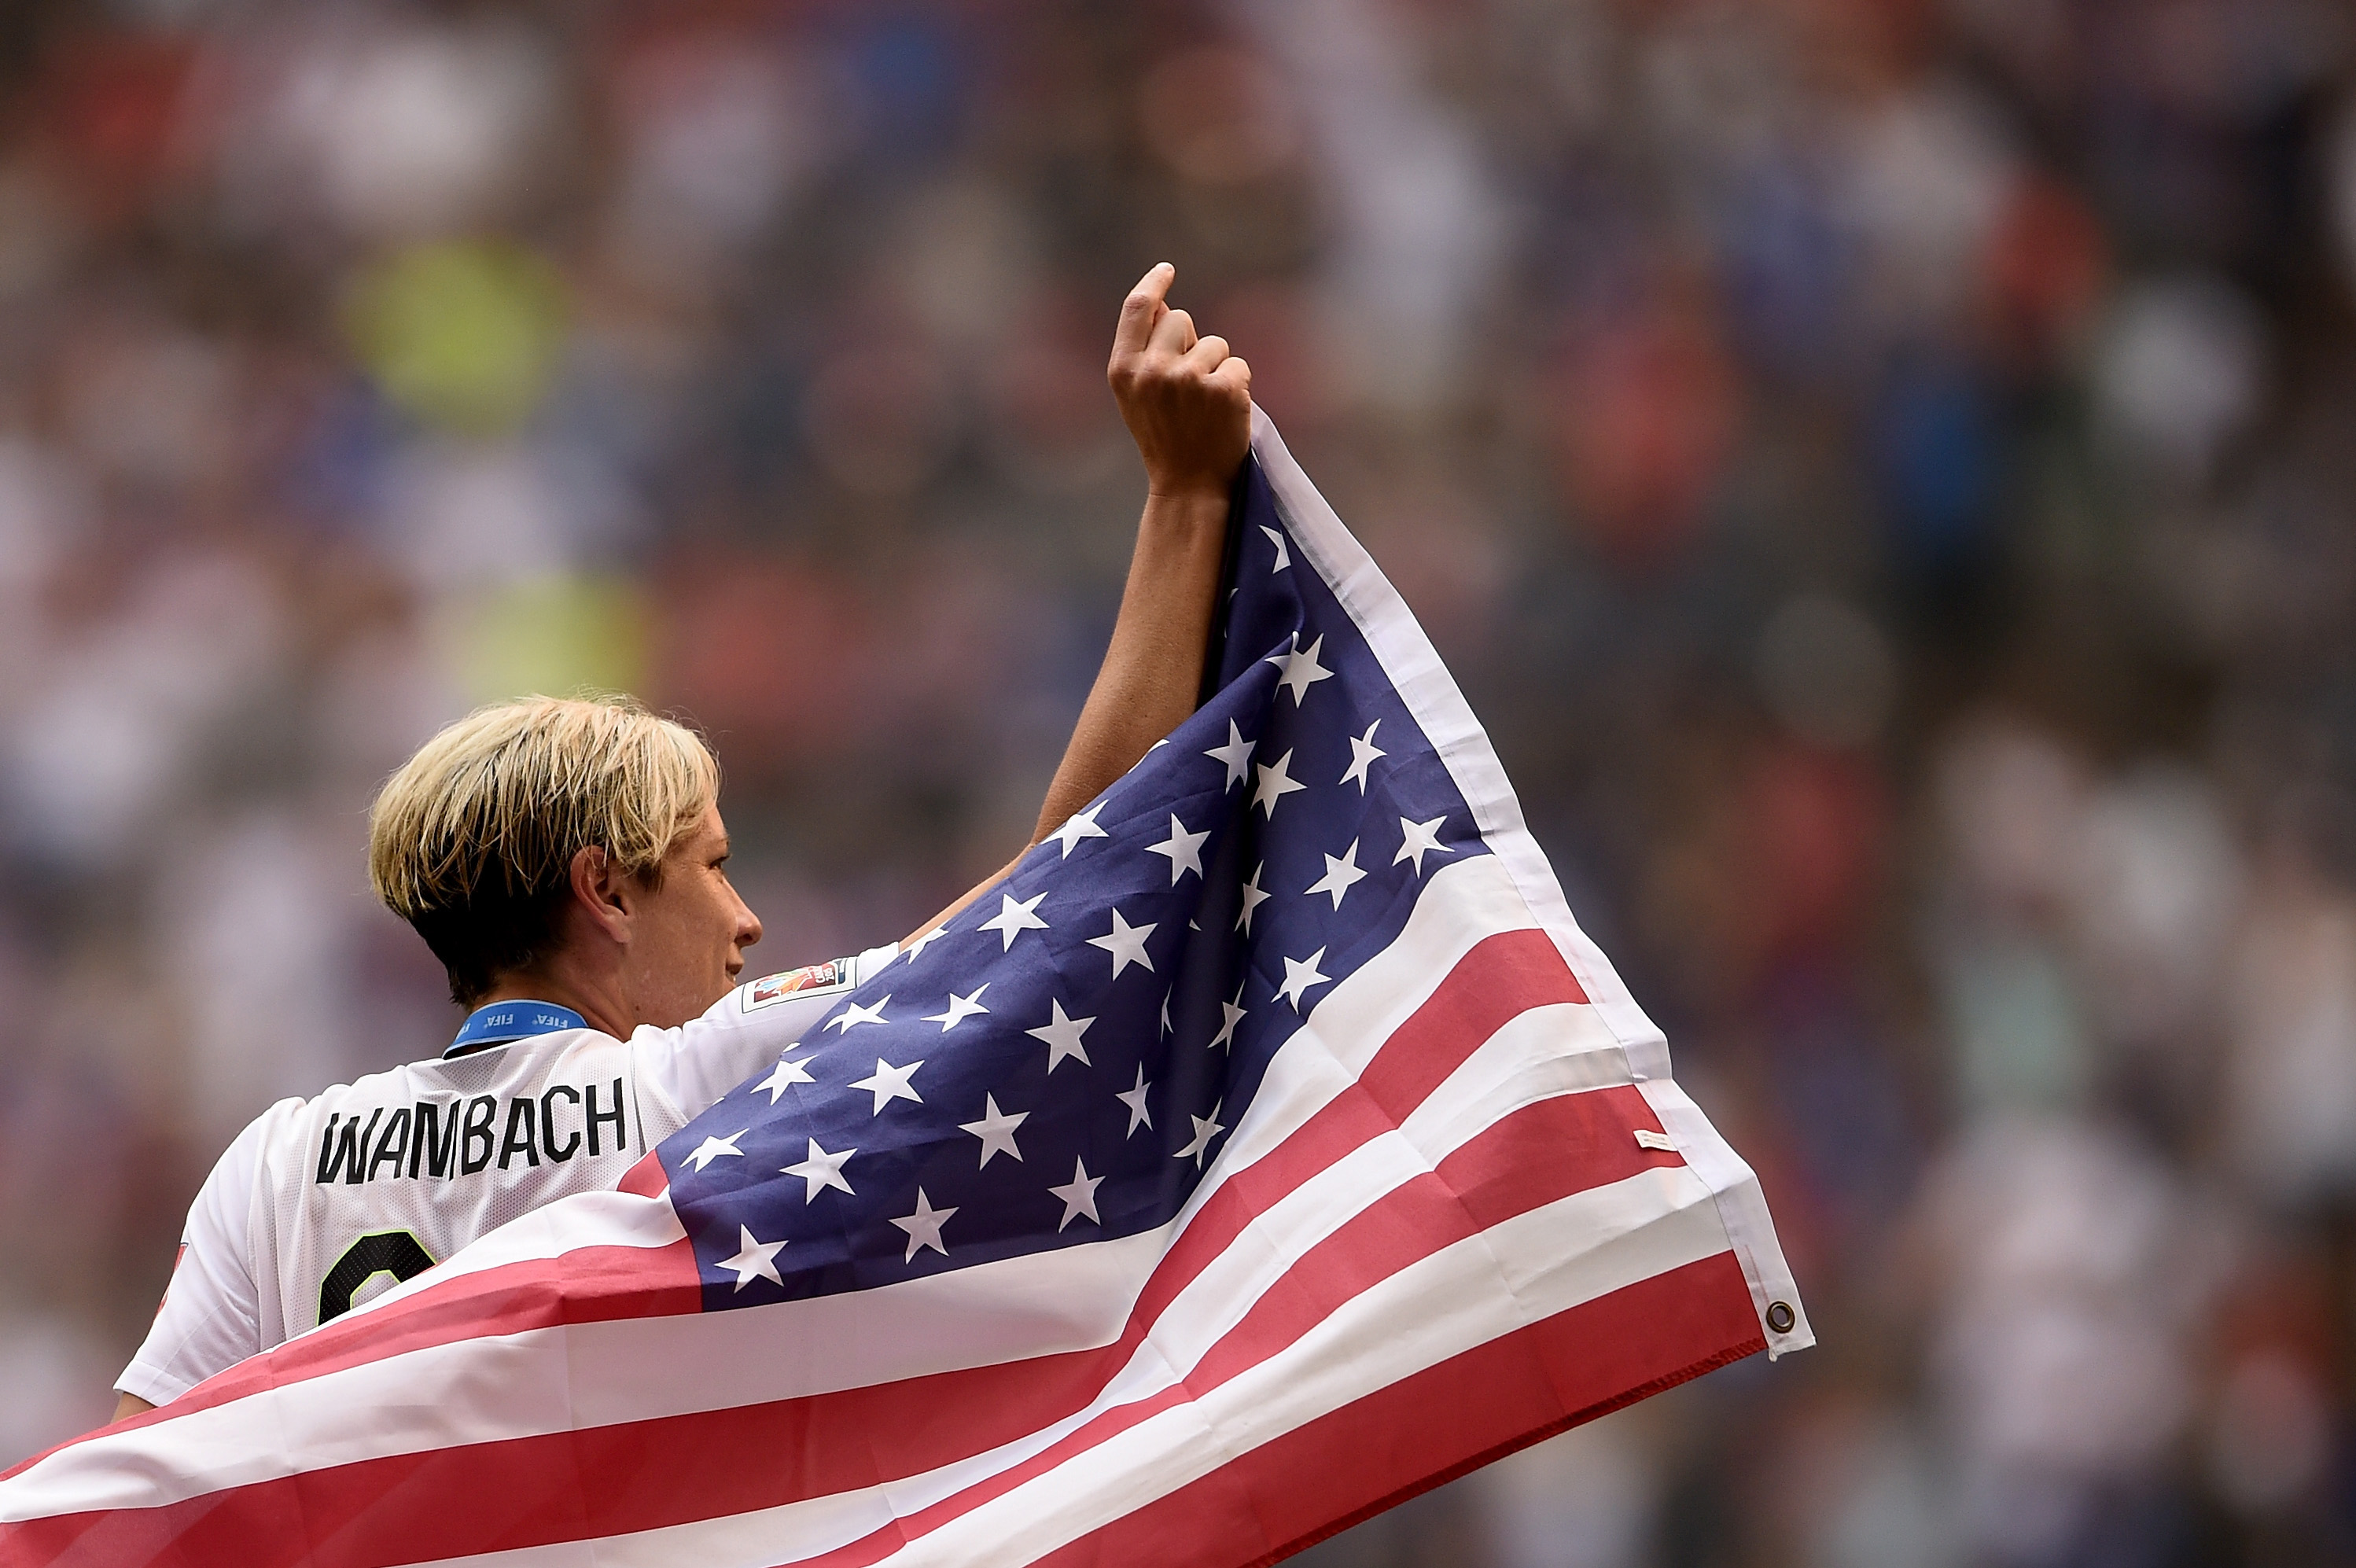 Abby Wambach of the U.S. celebrates after their 5-2 win over Japan in the FIFA Women's World Cup 2015 Final at BC Place Stadium in Vancouver on July 5, 2015. (Dennis Grombkowski—Getty Images)